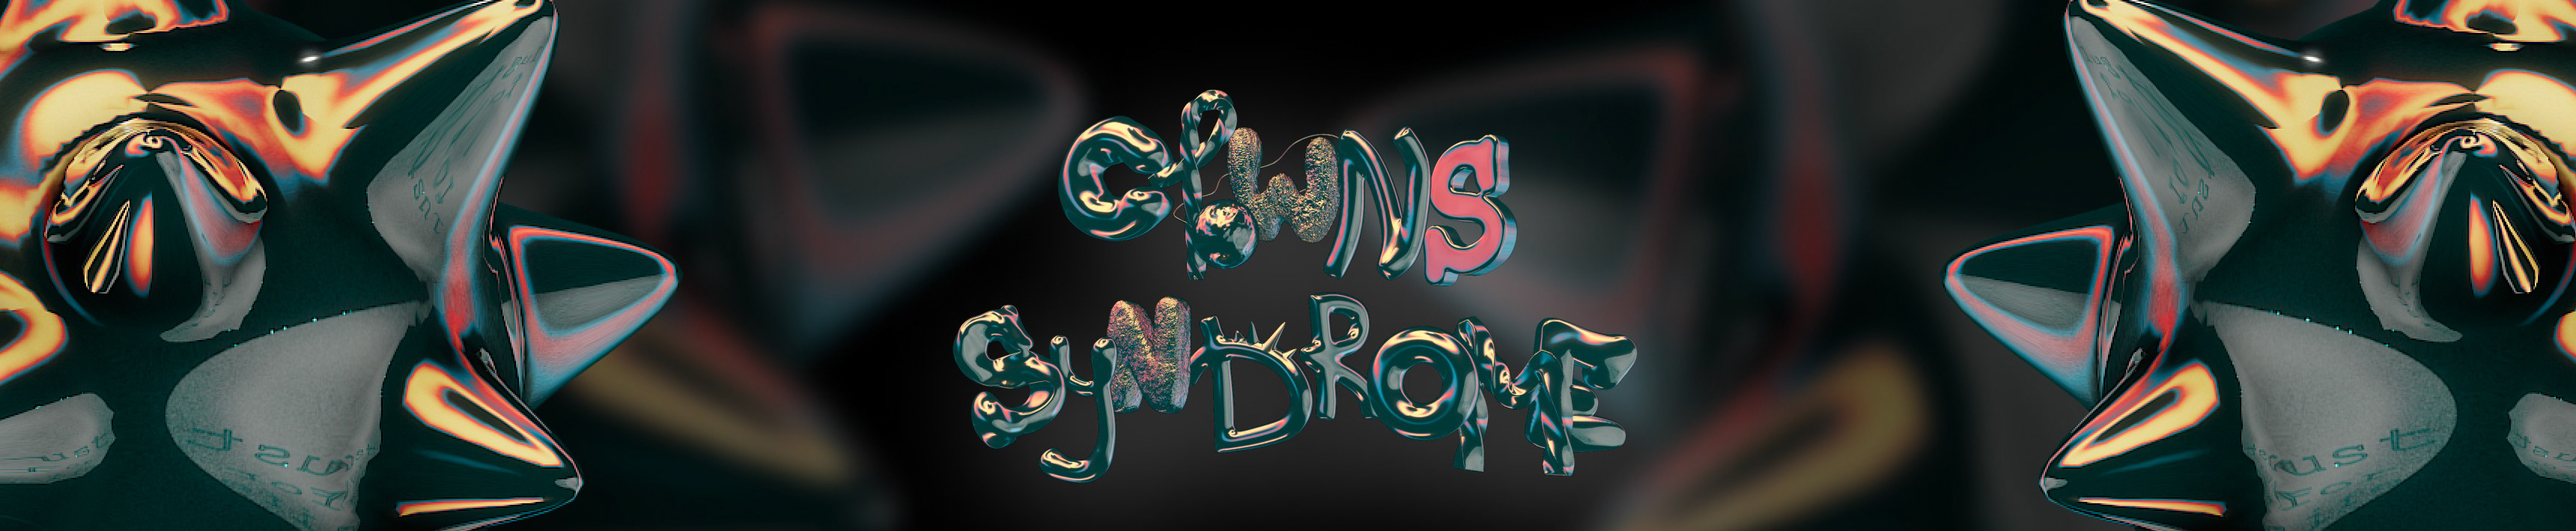 Clown's Syndromes profilbanner